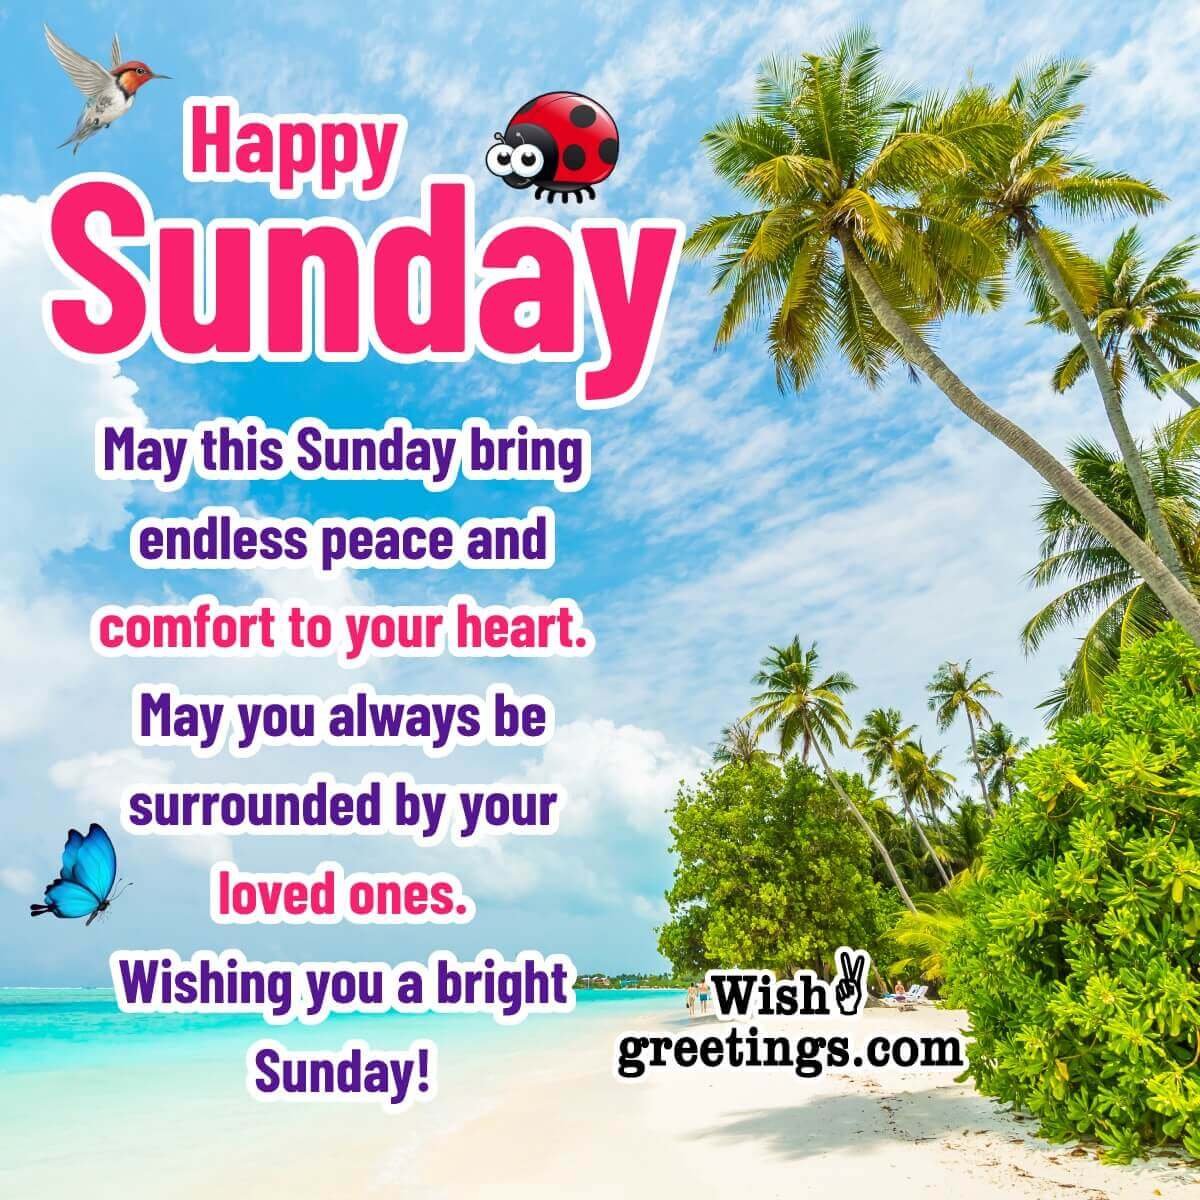 Happy Sunday Wishes Messages - Wish Greetings